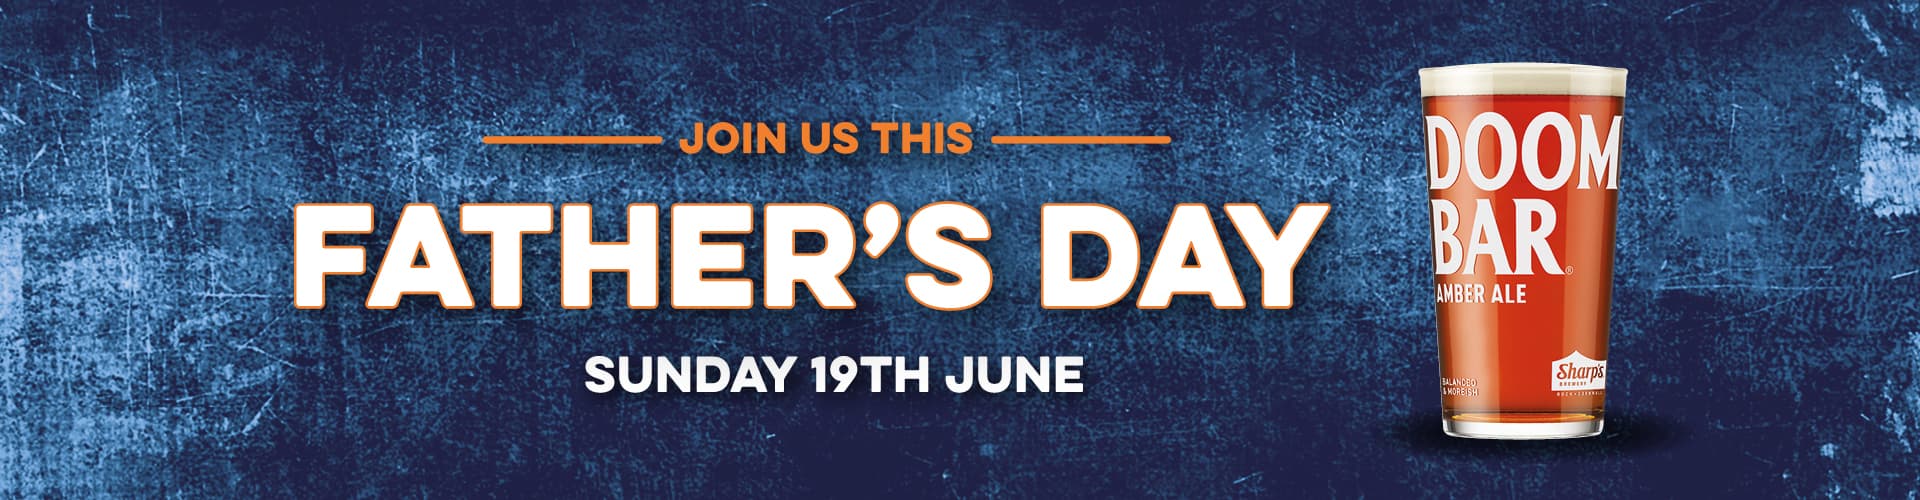 Father's Day at The Sutton Arms pub in Hornchurch